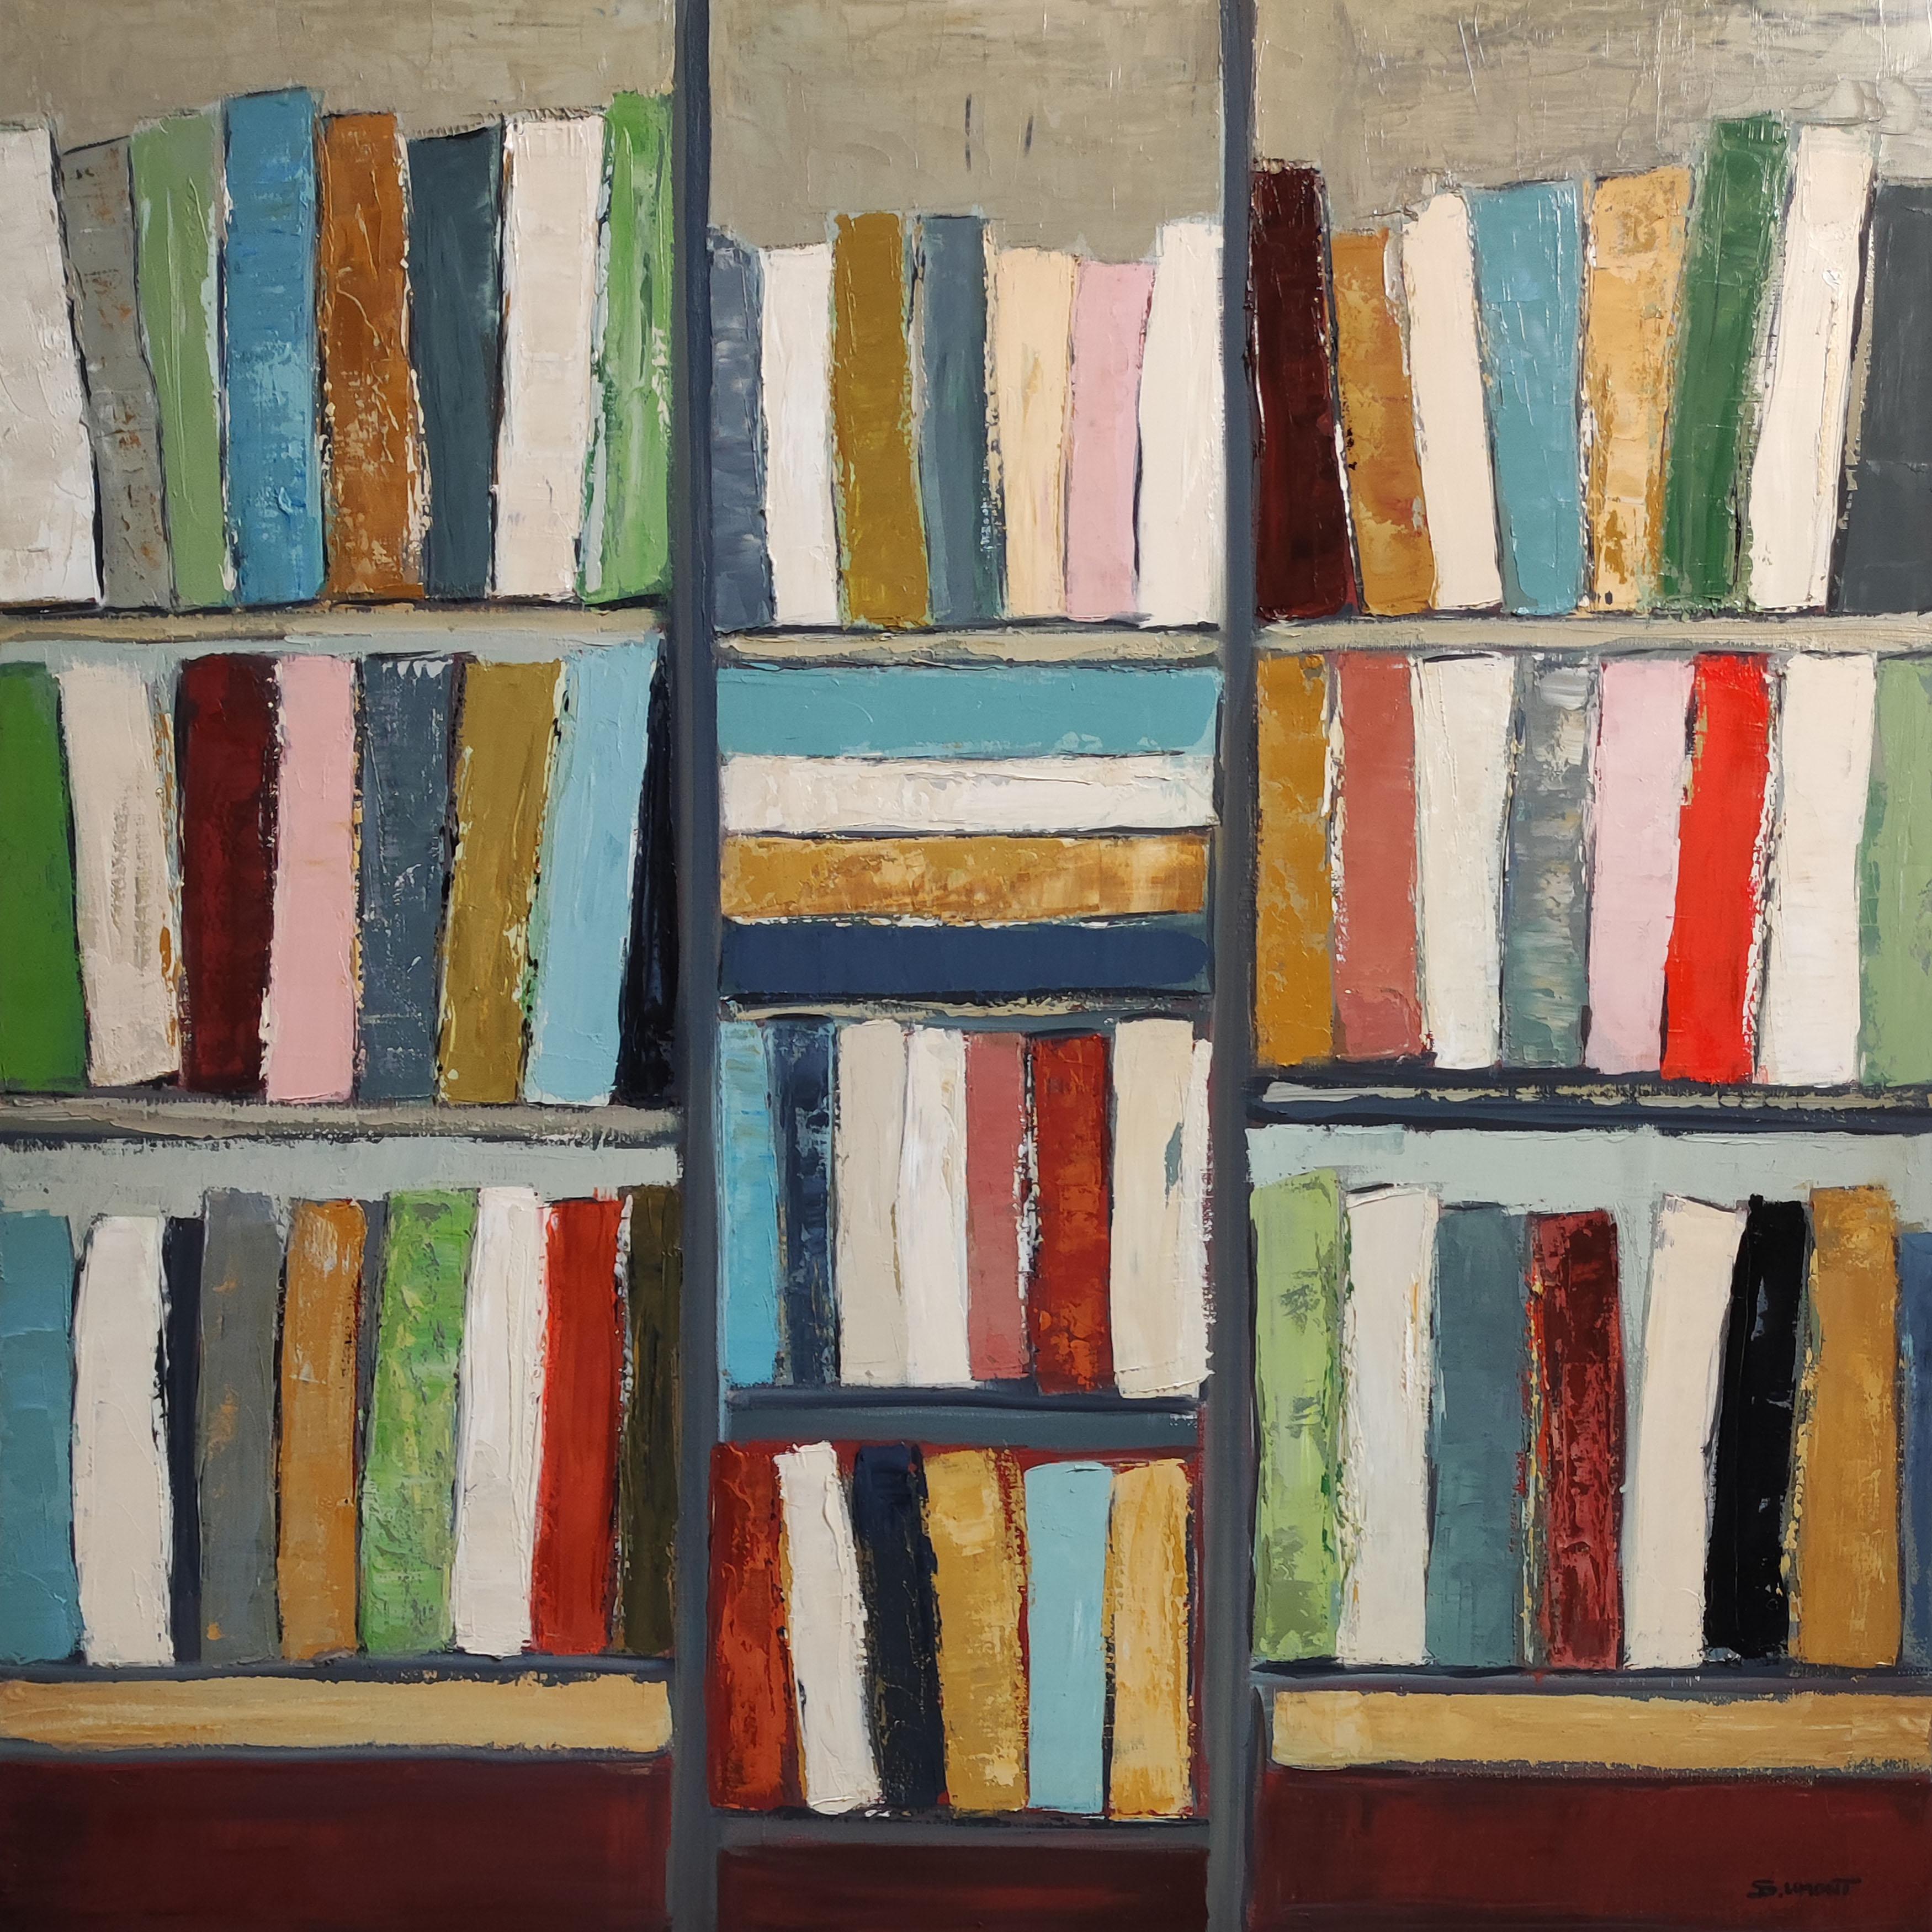 by Sophie Dumont offers an exploration of the convergence between literature and visual arts. The canvas depicts a library with colorful books, painted in oil using a palette knife, where the book becomes less of a daily object and more of a